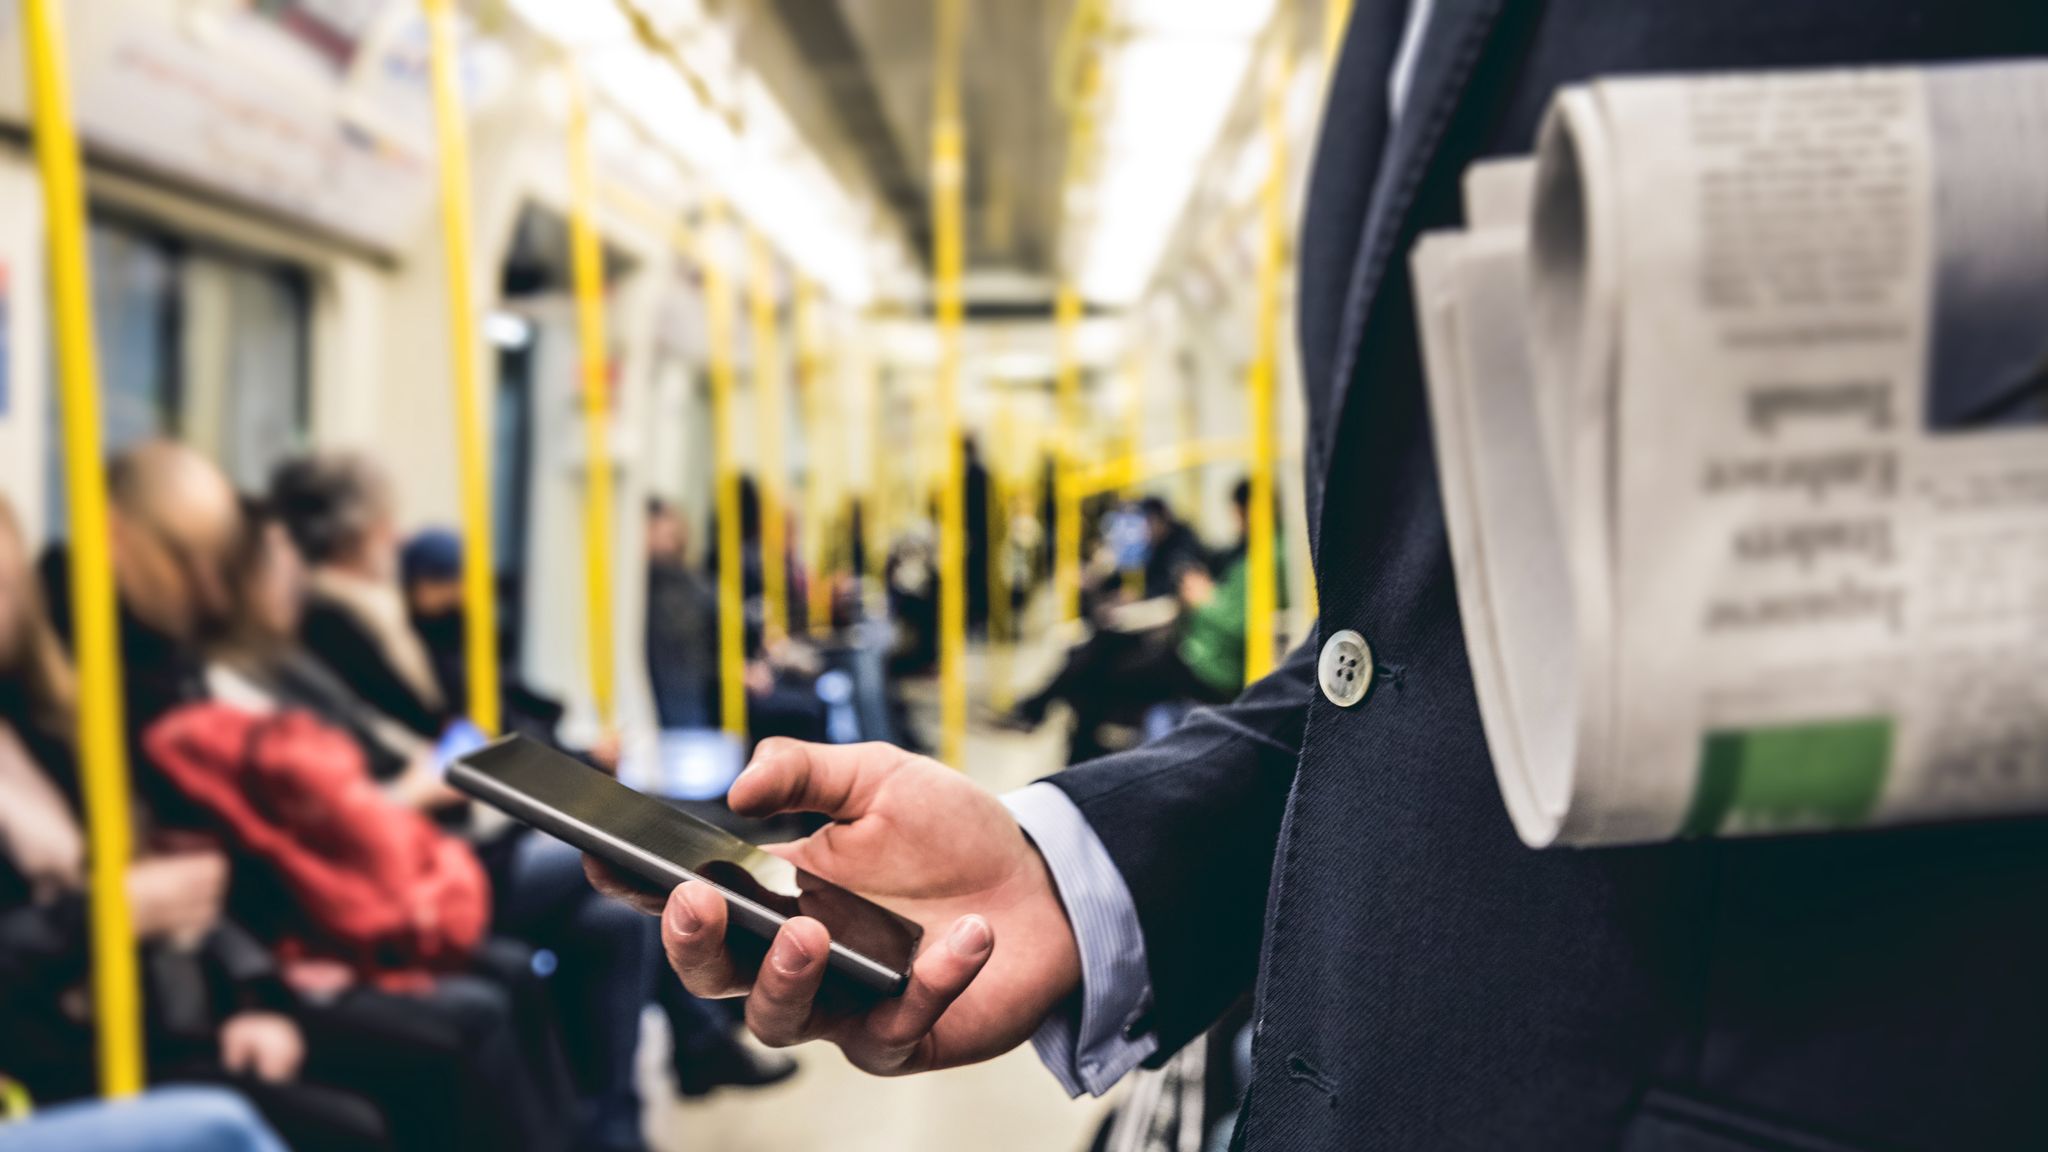 London Underground passengers to get full 4G coverage by mid-2020s | UK ...